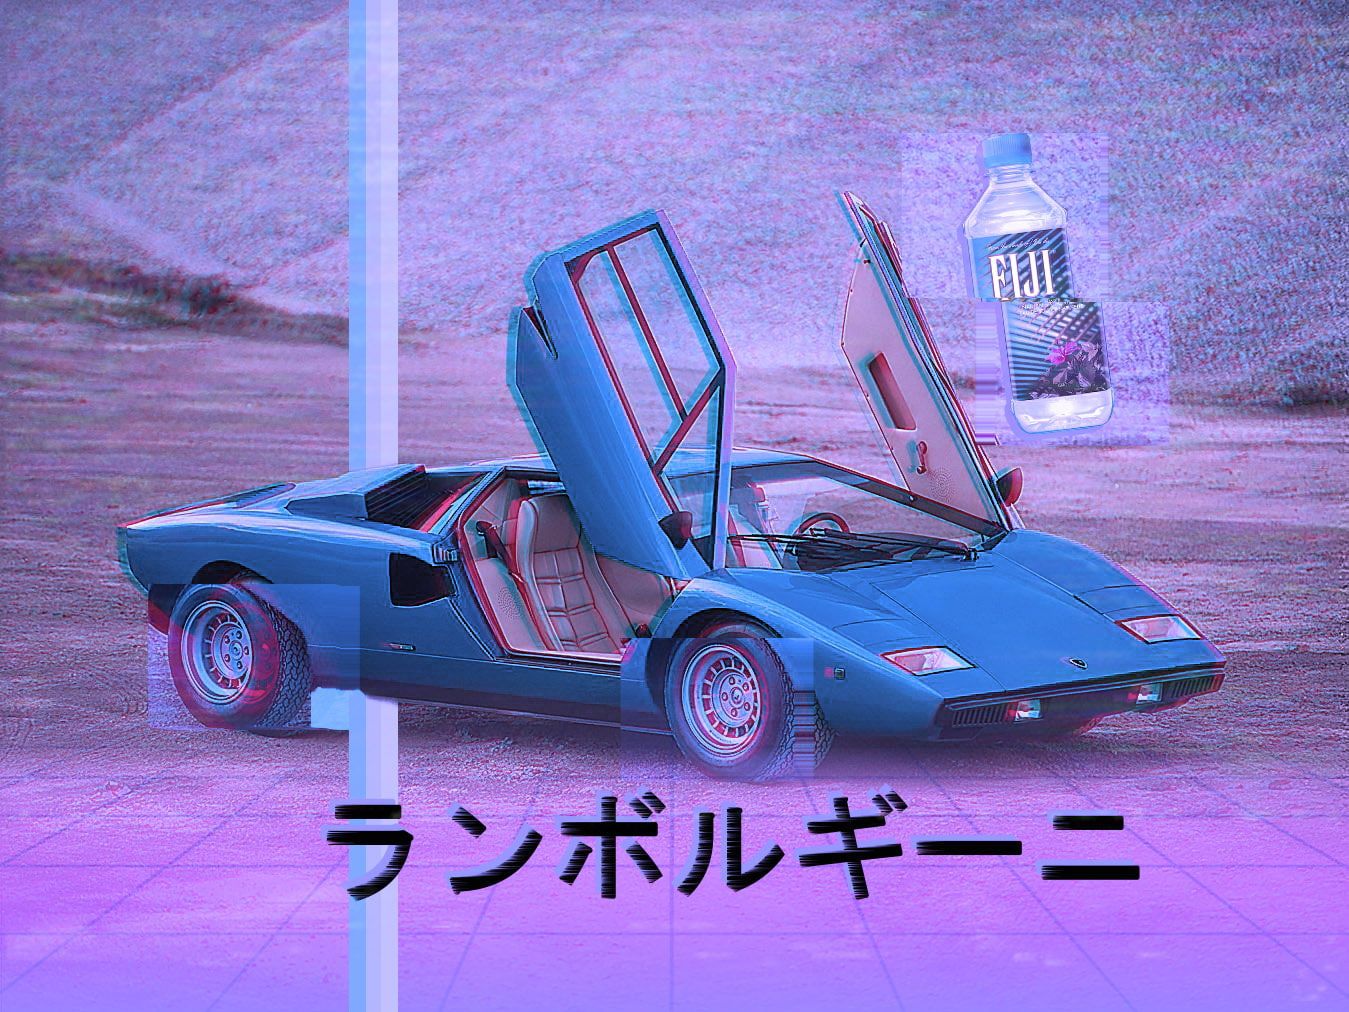 A Lamborghini Countach with the doors open and a Fiji bottle in the background - 80s